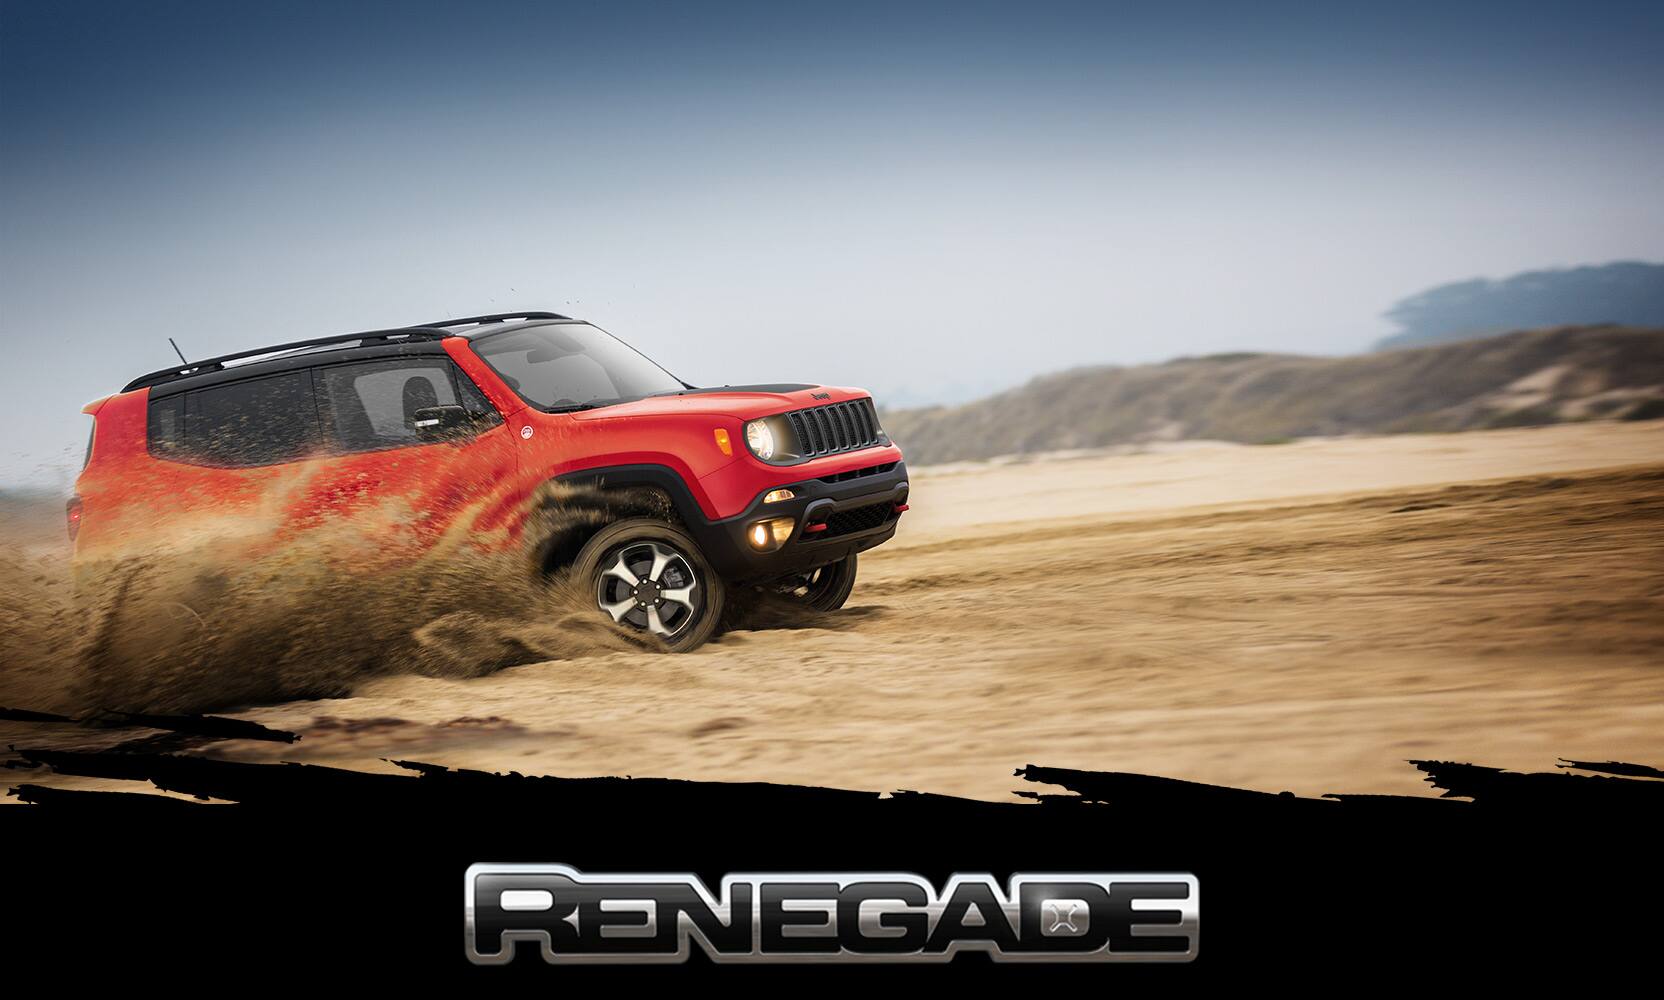 The 2023 Jeep Renegade Trailhawk being driven off-road in the desert with a spray of sand coming from its wheels. Make this the summer event.